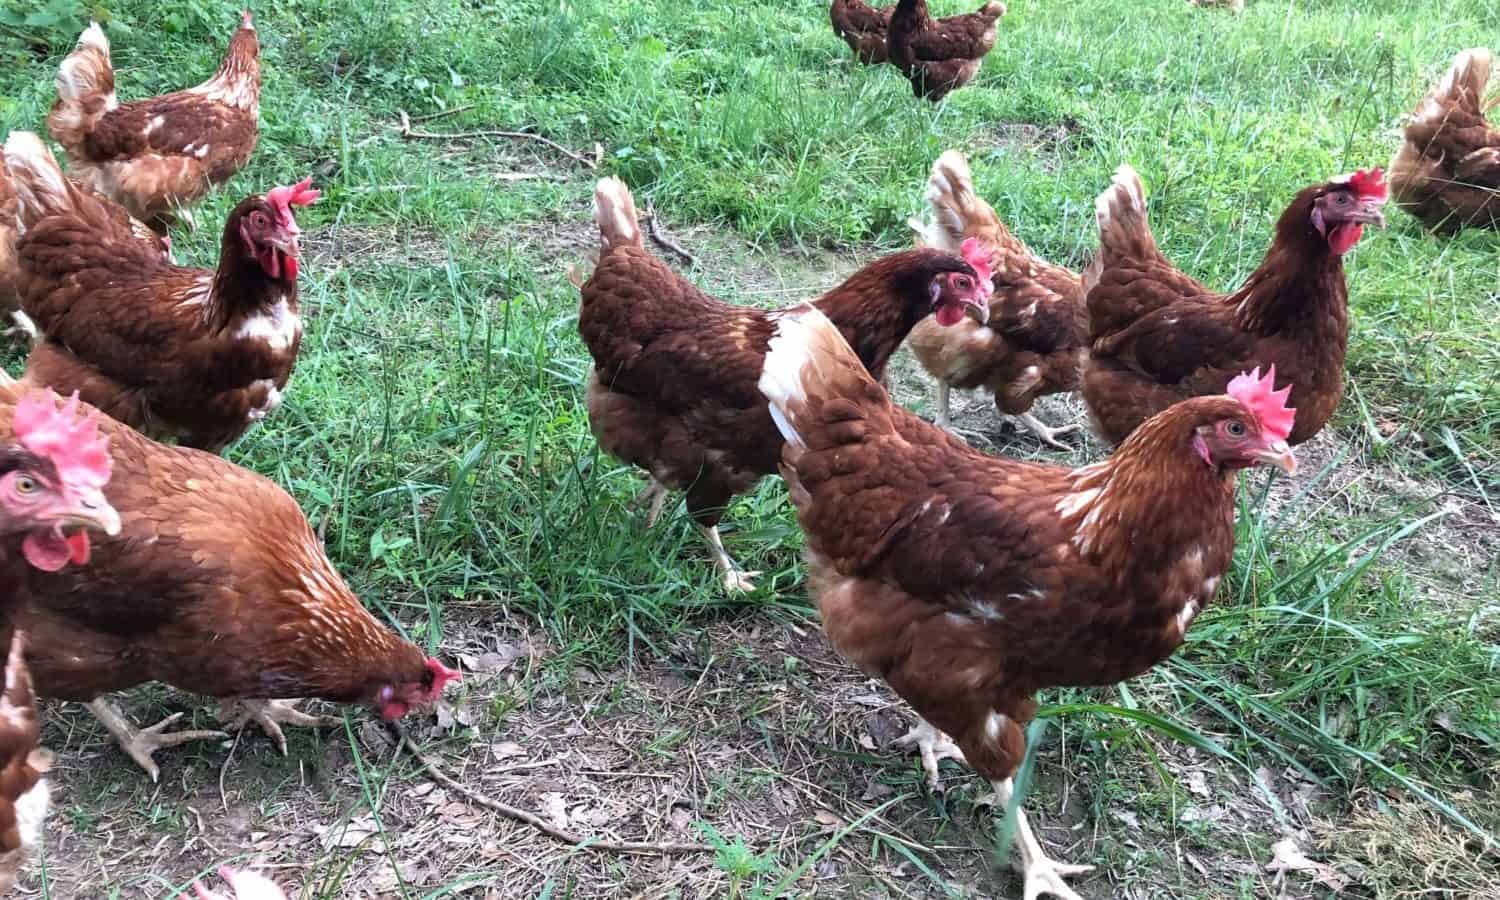 Vital Farms proves that pasture-raised egg production can be scaled up while maintaining the integrity of an ethical and environmentally-conscious system.